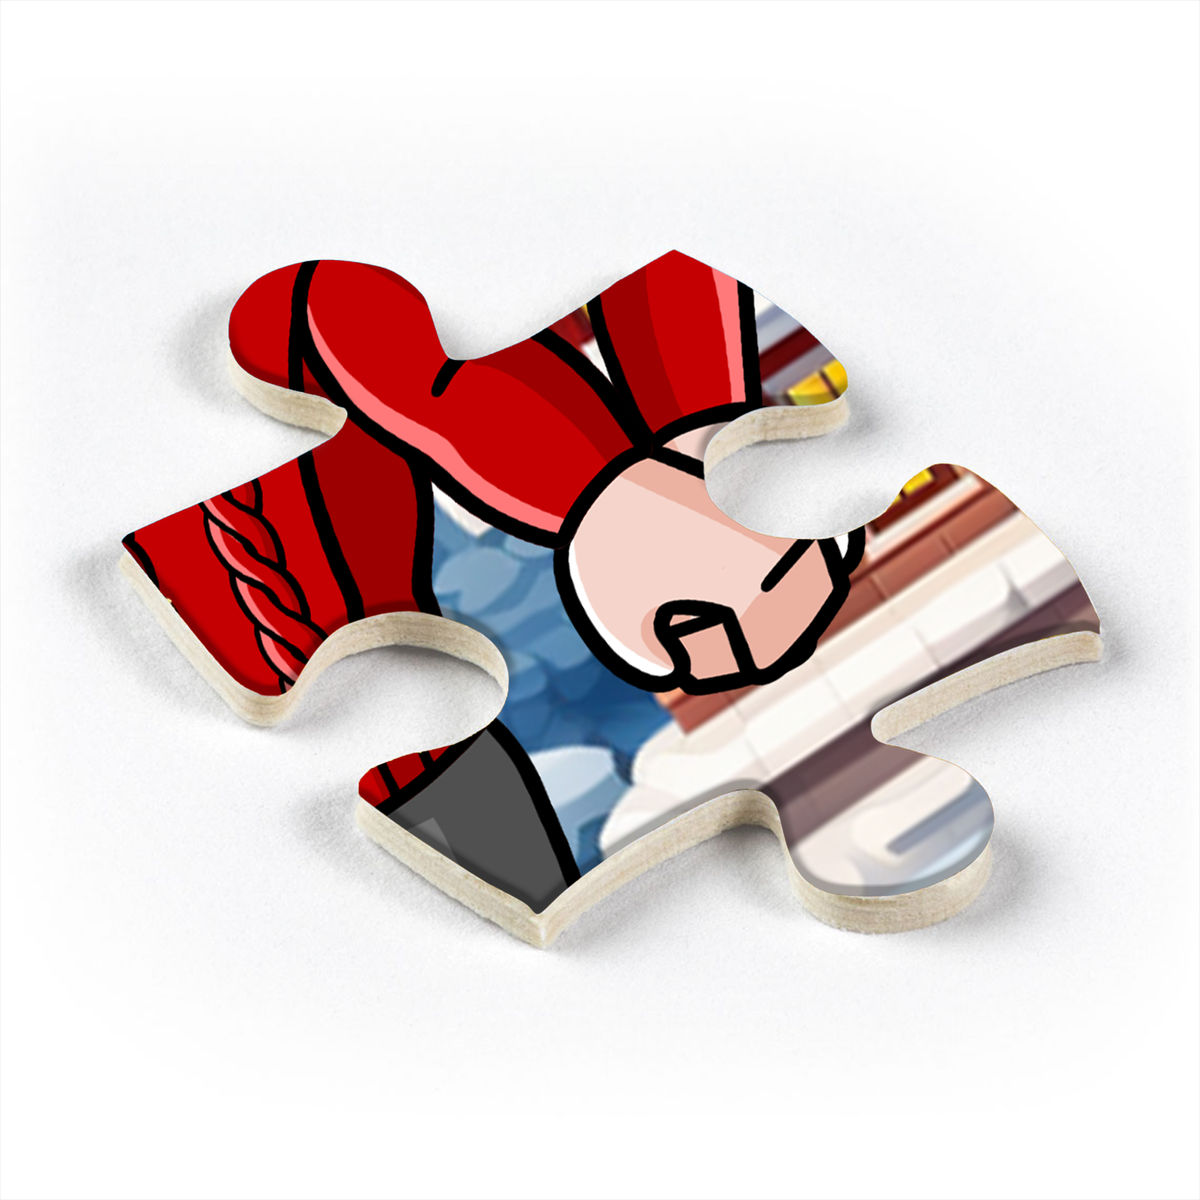 Personalized Puzzle - Jigsaw Puzzle Personalized - Together Since 2024 - Couple Christmas Gift (1)_2